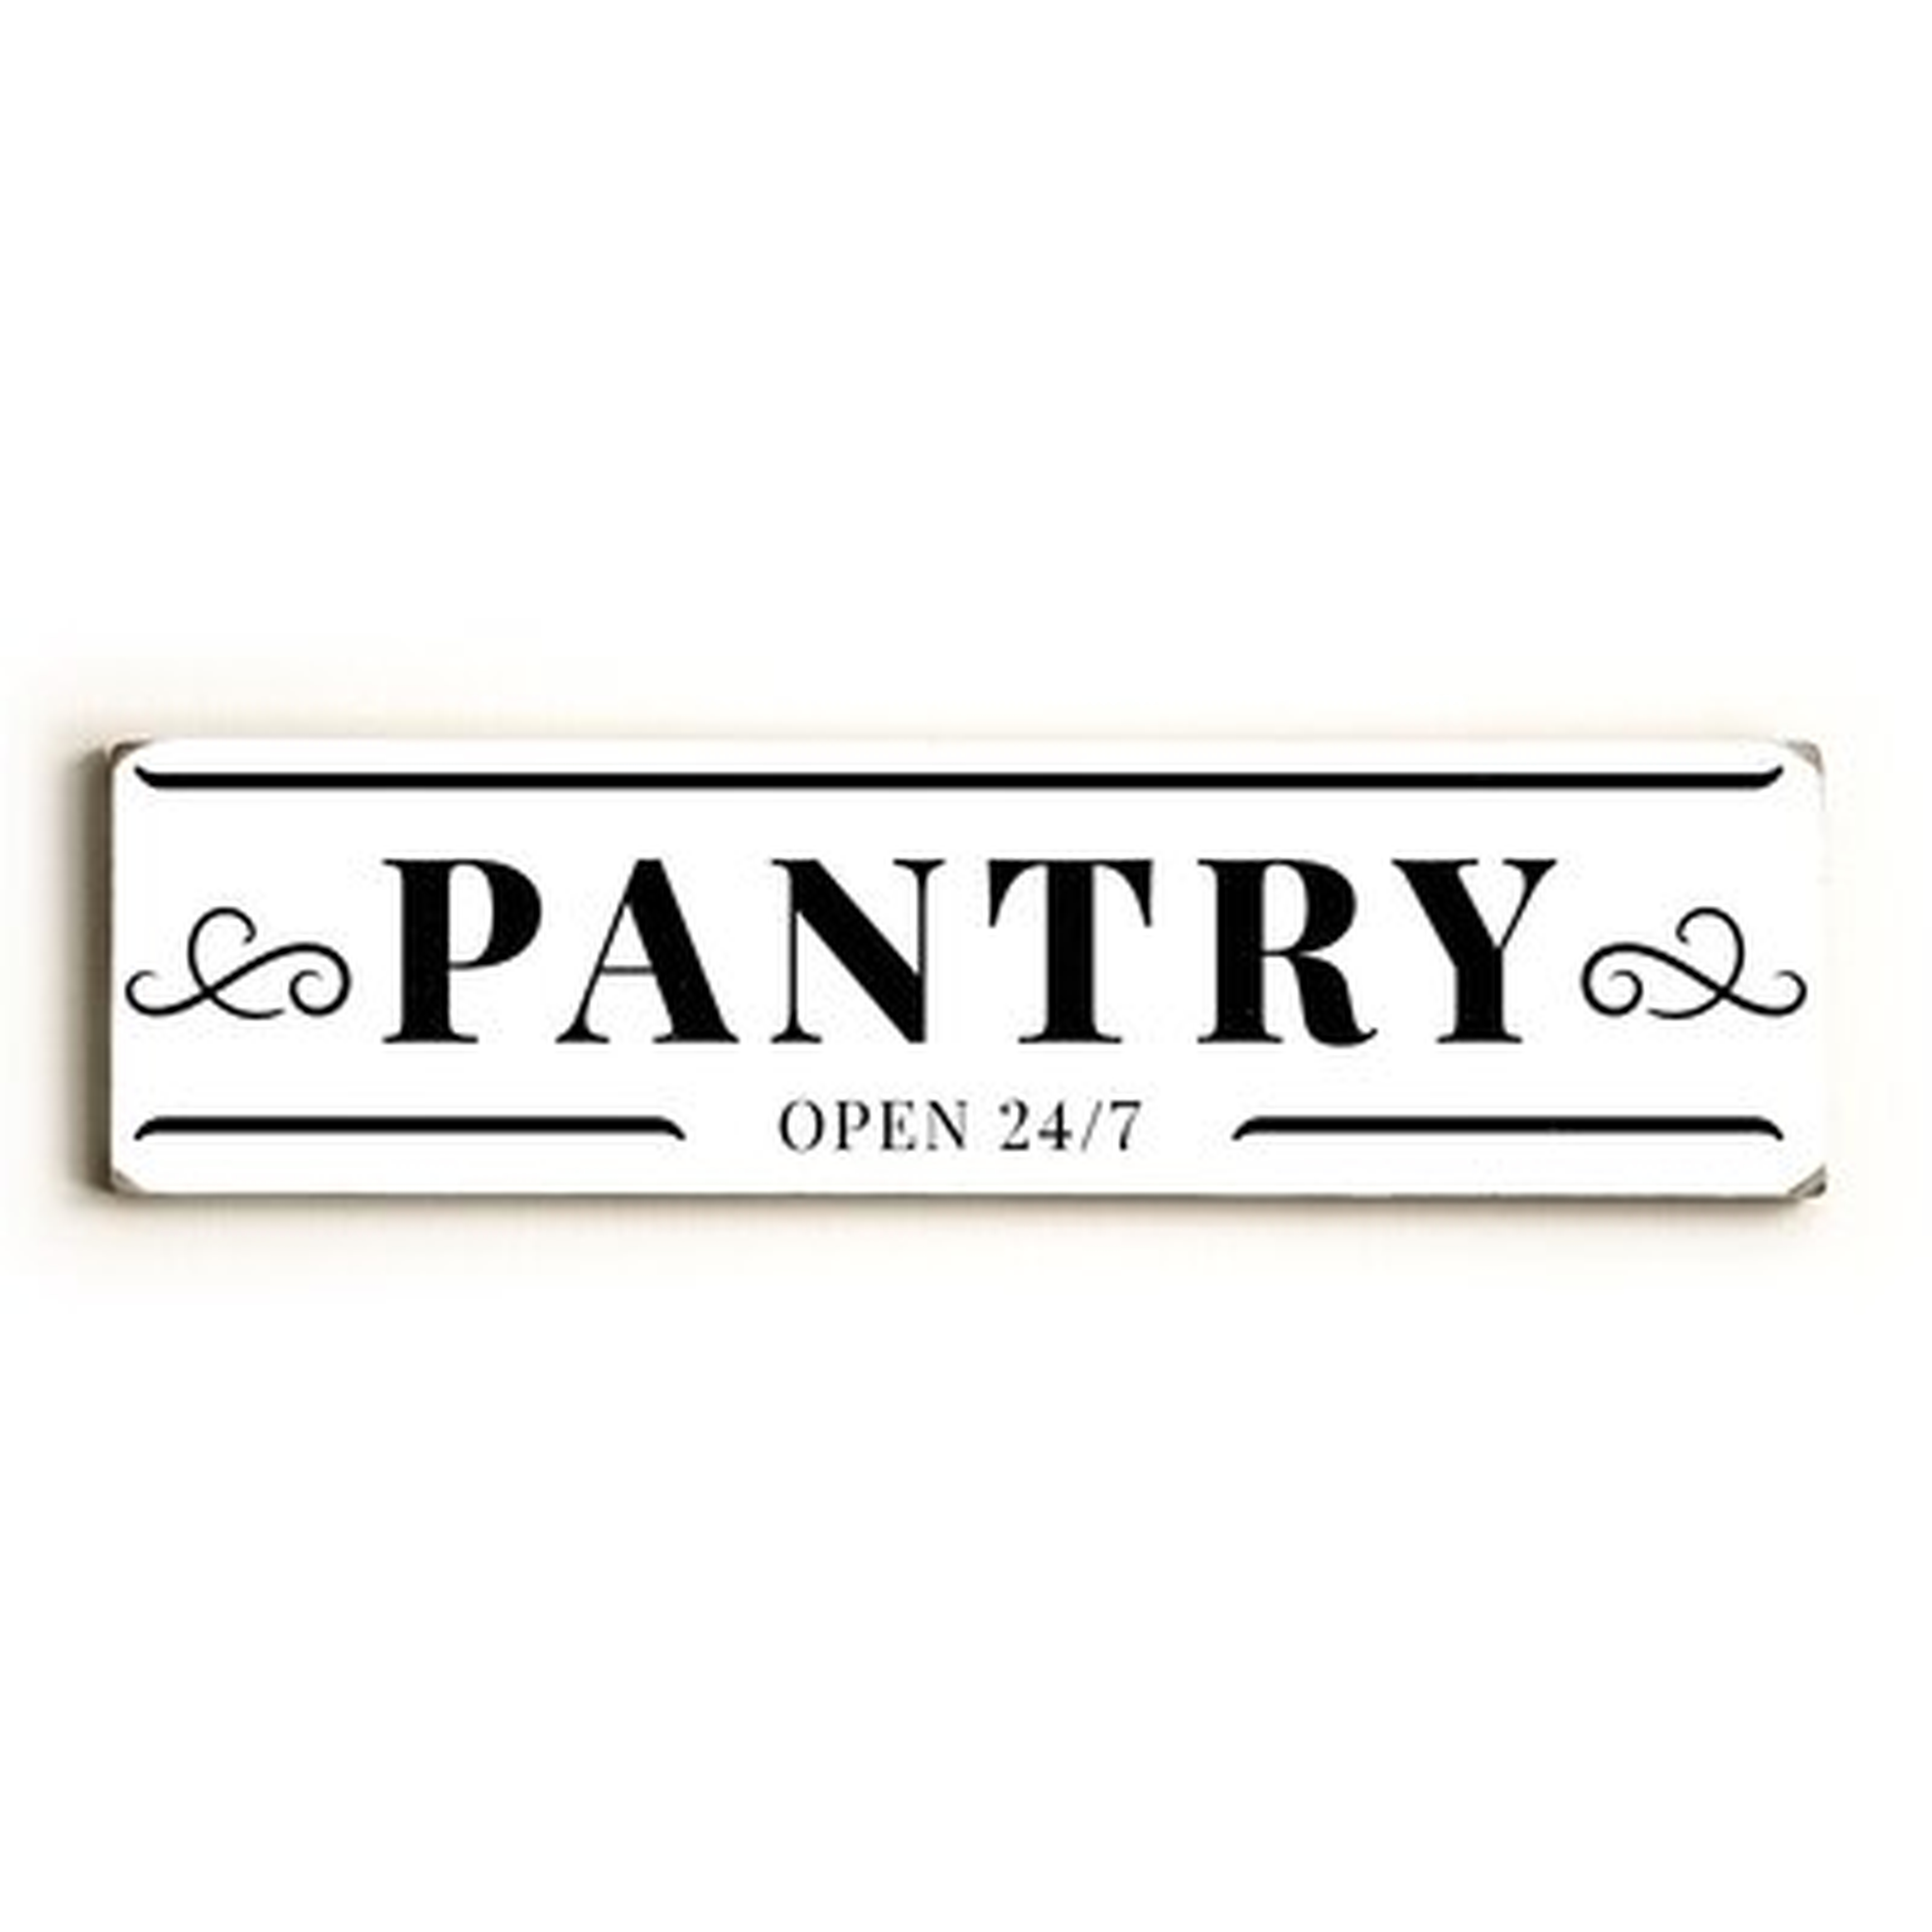 Pantry -  6X22 Solid Wood Sign By OBC - Wayfair